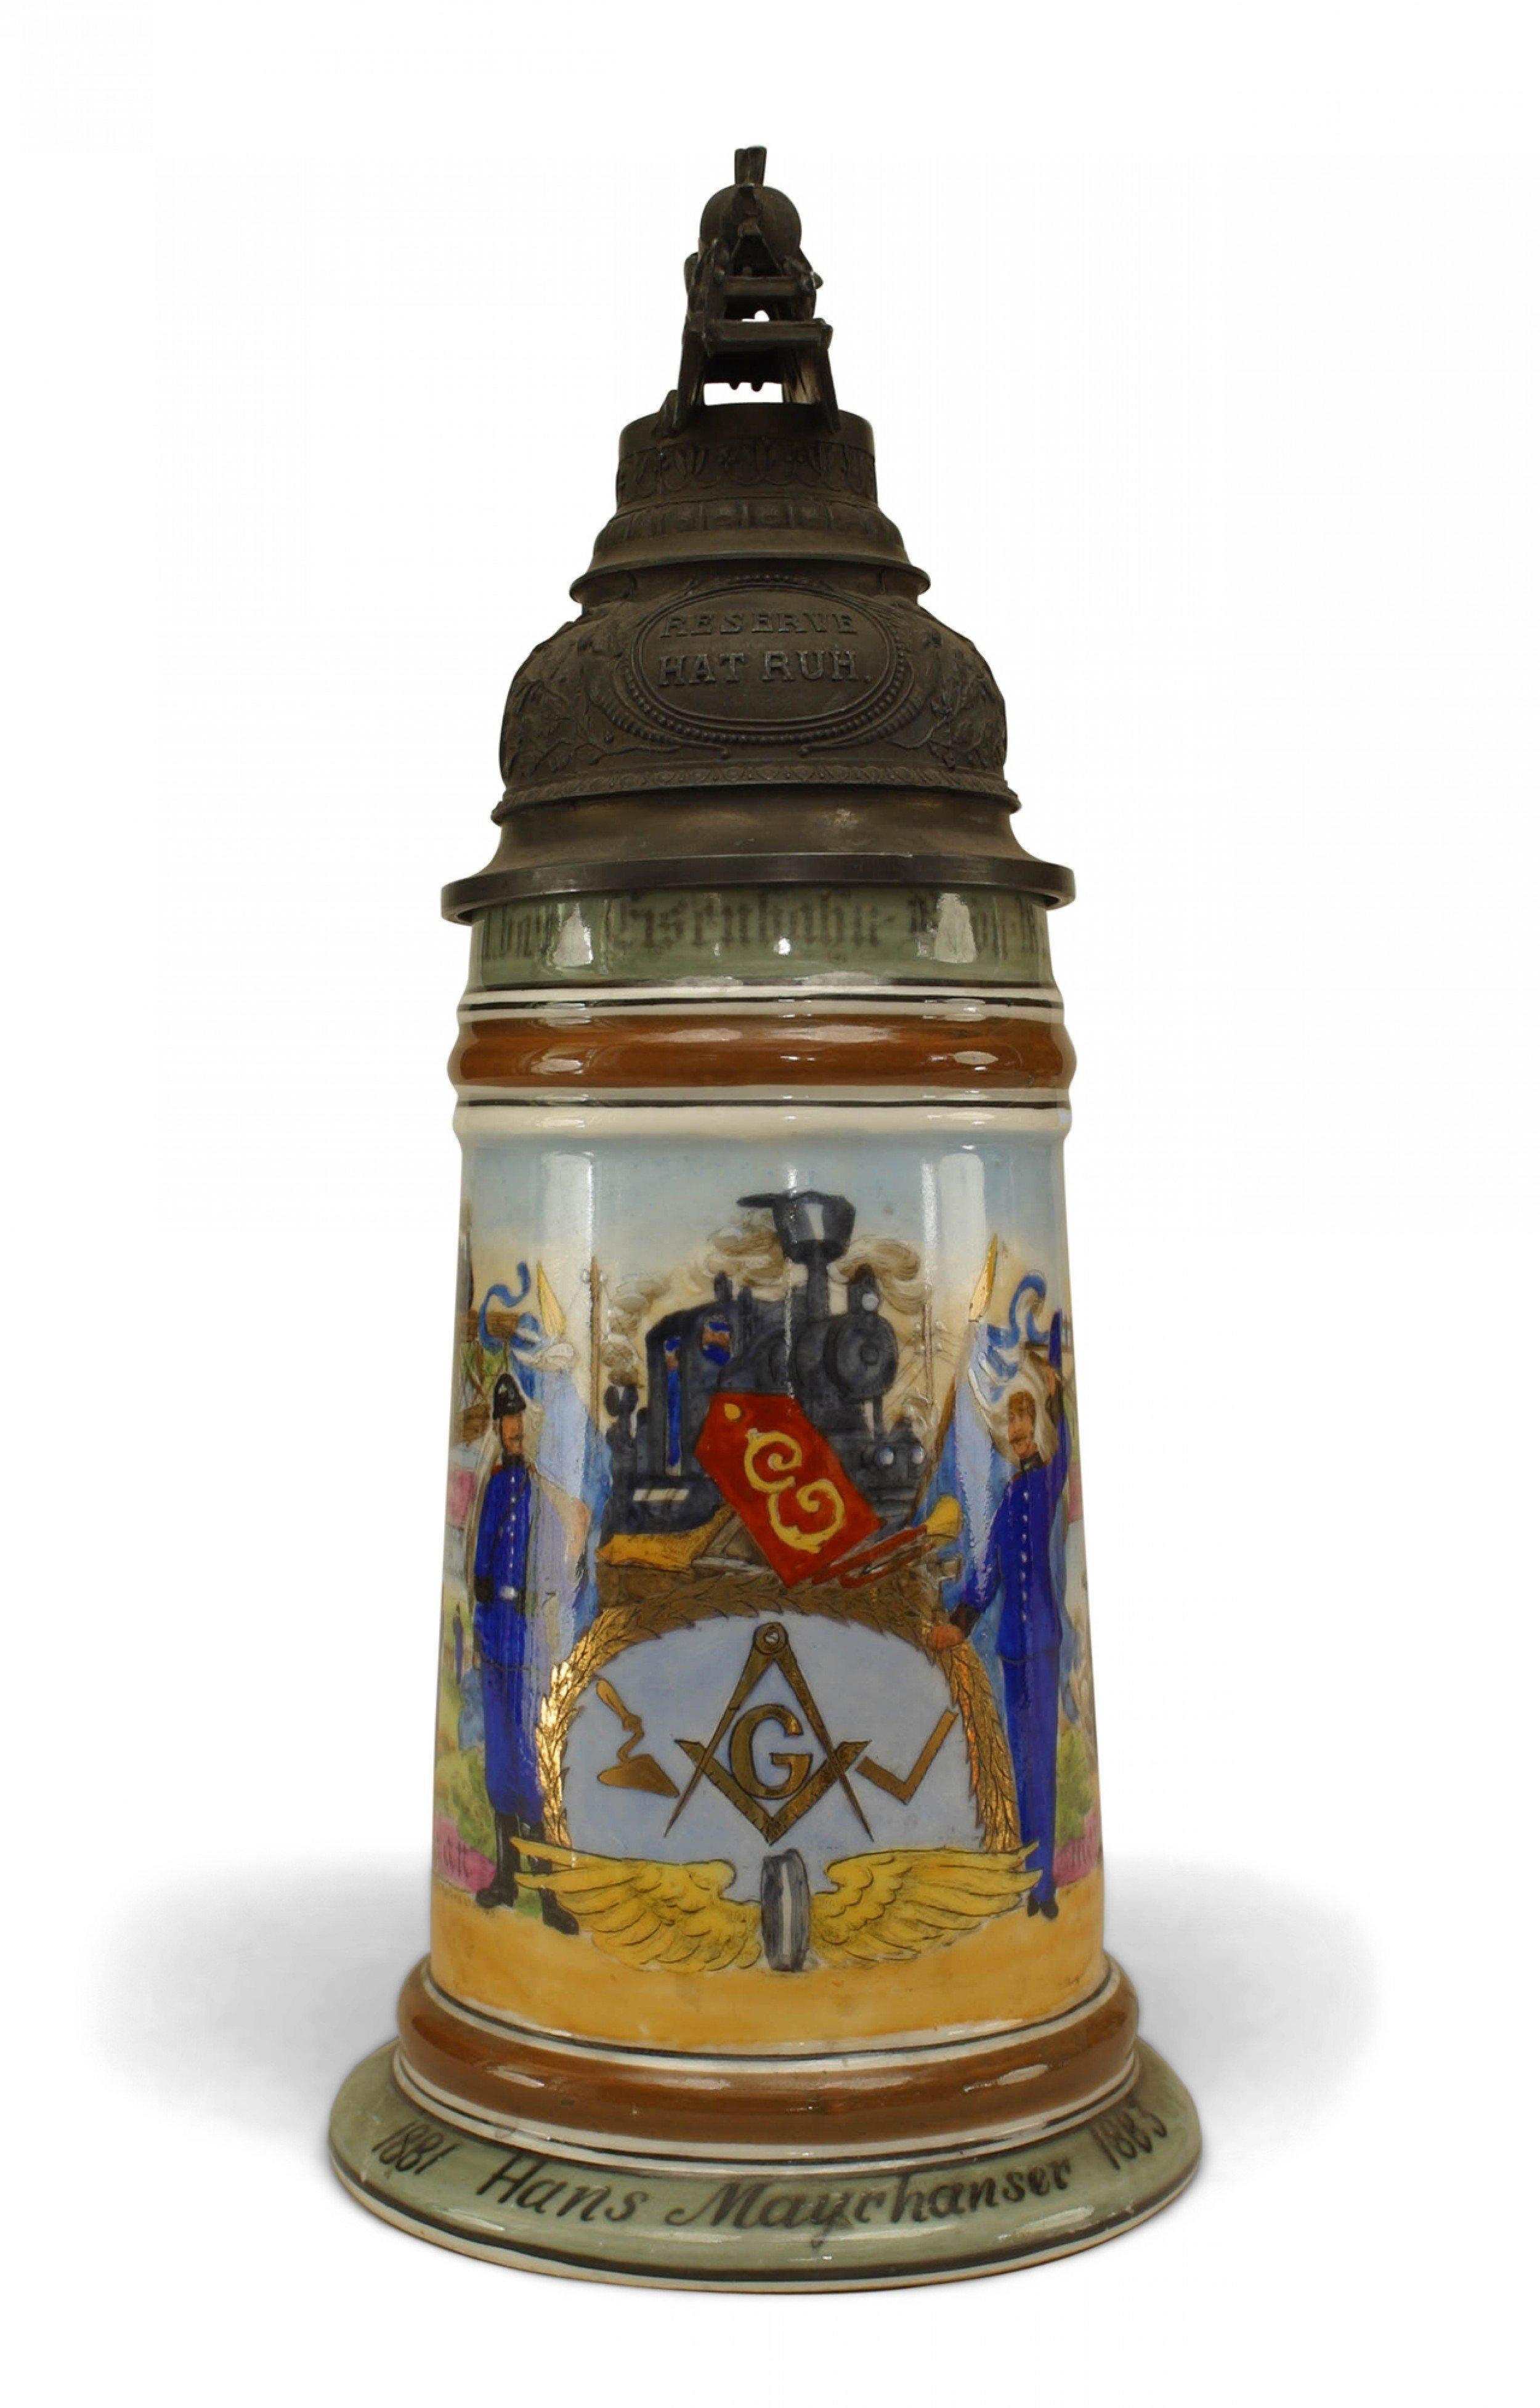 German porcelain beer stein with railroad scene and and pewter top with locomotive finial (1881).
 